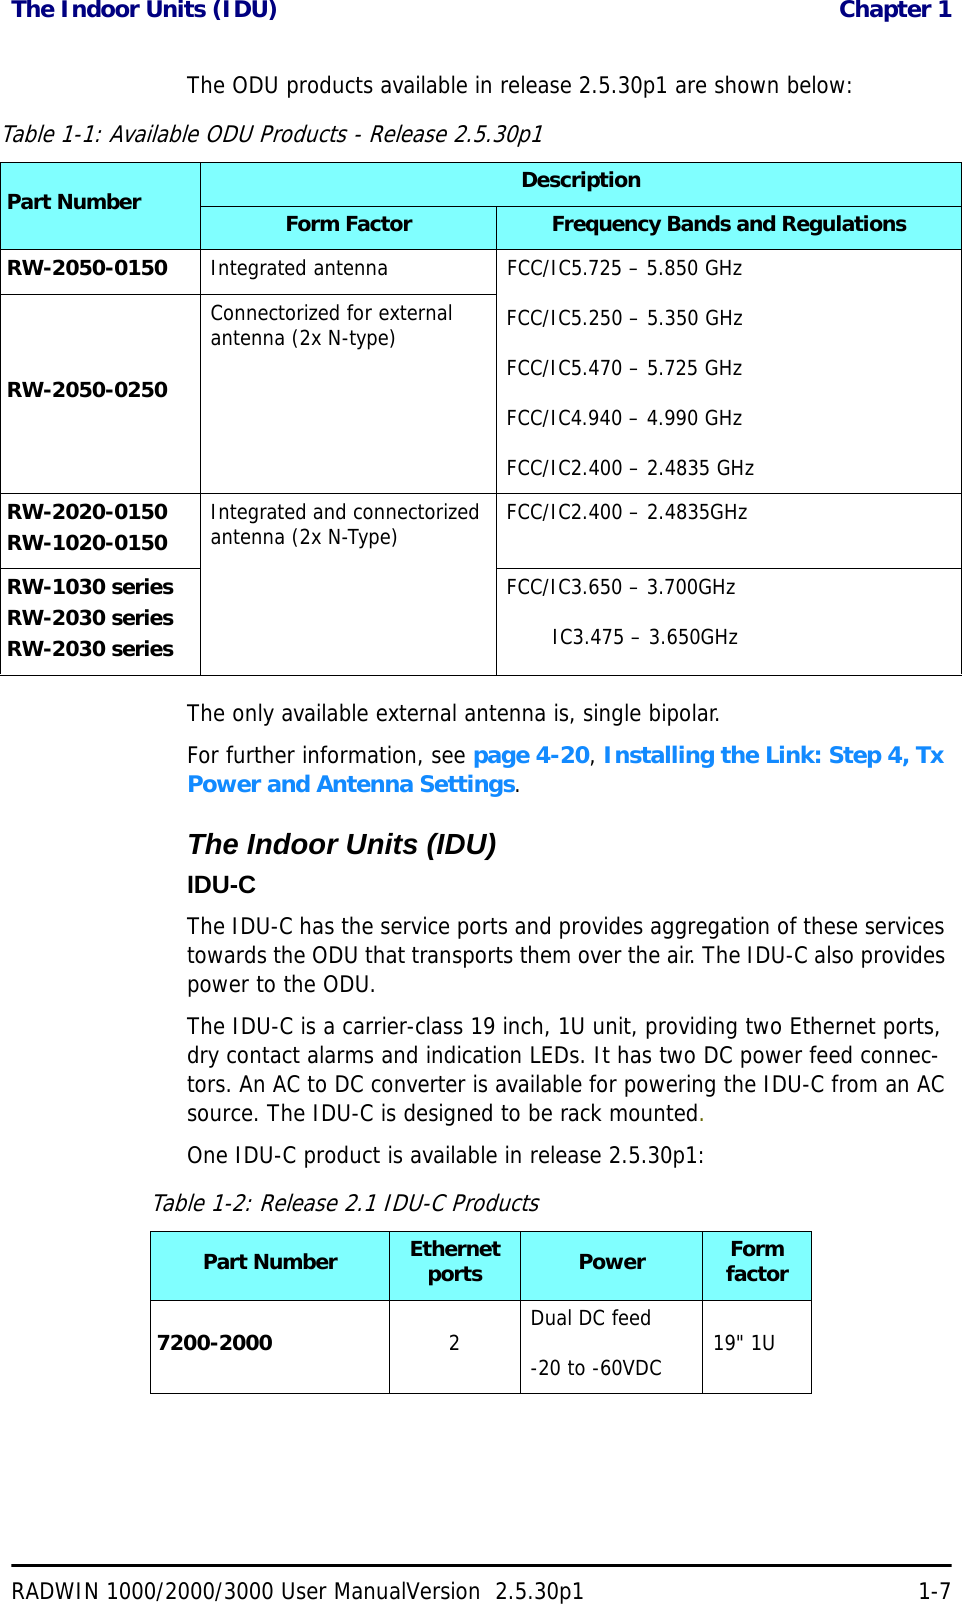 The Indoor Units (IDU)  Chapter 1RADWIN 1000/2000/3000 User ManualVersion  2.5.30p1 1-7The ODU products available in release 2.5.30p1 are shown below:The only available external antenna is, single bipolar.For further information, see page 4-20, Installing the Link: Step 4, Tx Power and Antenna Settings.The Indoor Units (IDU)IDU-CThe IDU-C has the service ports and provides aggregation of these services towards the ODU that transports them over the air. The IDU-C also provides power to the ODU.The IDU-C is a carrier-class 19 inch, 1U unit, providing two Ethernet ports, dry contact alarms and indication LEDs. It has two DC power feed connec-tors. An AC to DC converter is available for powering the IDU-C from an AC source. The IDU-C is designed to be rack mounted.One IDU-C product is available in release 2.5.30p1:Table 1-1: Available ODU Products - Release 2.5.30p1Part Number DescriptionForm Factor Frequency Bands and RegulationsRW-2050-0150 Integrated antenna  FCC/IC5.725 – 5.850 GHzFCC/IC5.250 – 5.350 GHzFCC/IC5.470 – 5.725 GHzFCC/IC4.940 – 4.990 GHzFCC/IC2.400 – 2.4835 GHzRW-2050-0250Connectorized for external antenna (2x N-type)RW-2020-0150RW-1020-0150 Integrated and connectorized antenna (2x N-Type) FCC/IC2.400 – 2.4835GHzRW-1030 seriesRW-2030 seriesRW-2030 seriesFCC/IC3.650 – 3.700GHz       IC3.475 – 3.650GHzTable 1-2: Release 2.1 IDU-C ProductsPart Number Ethernet ports Power Form factor7200-2000 2Dual DC feed-20 to -60VDC 19&quot; 1U